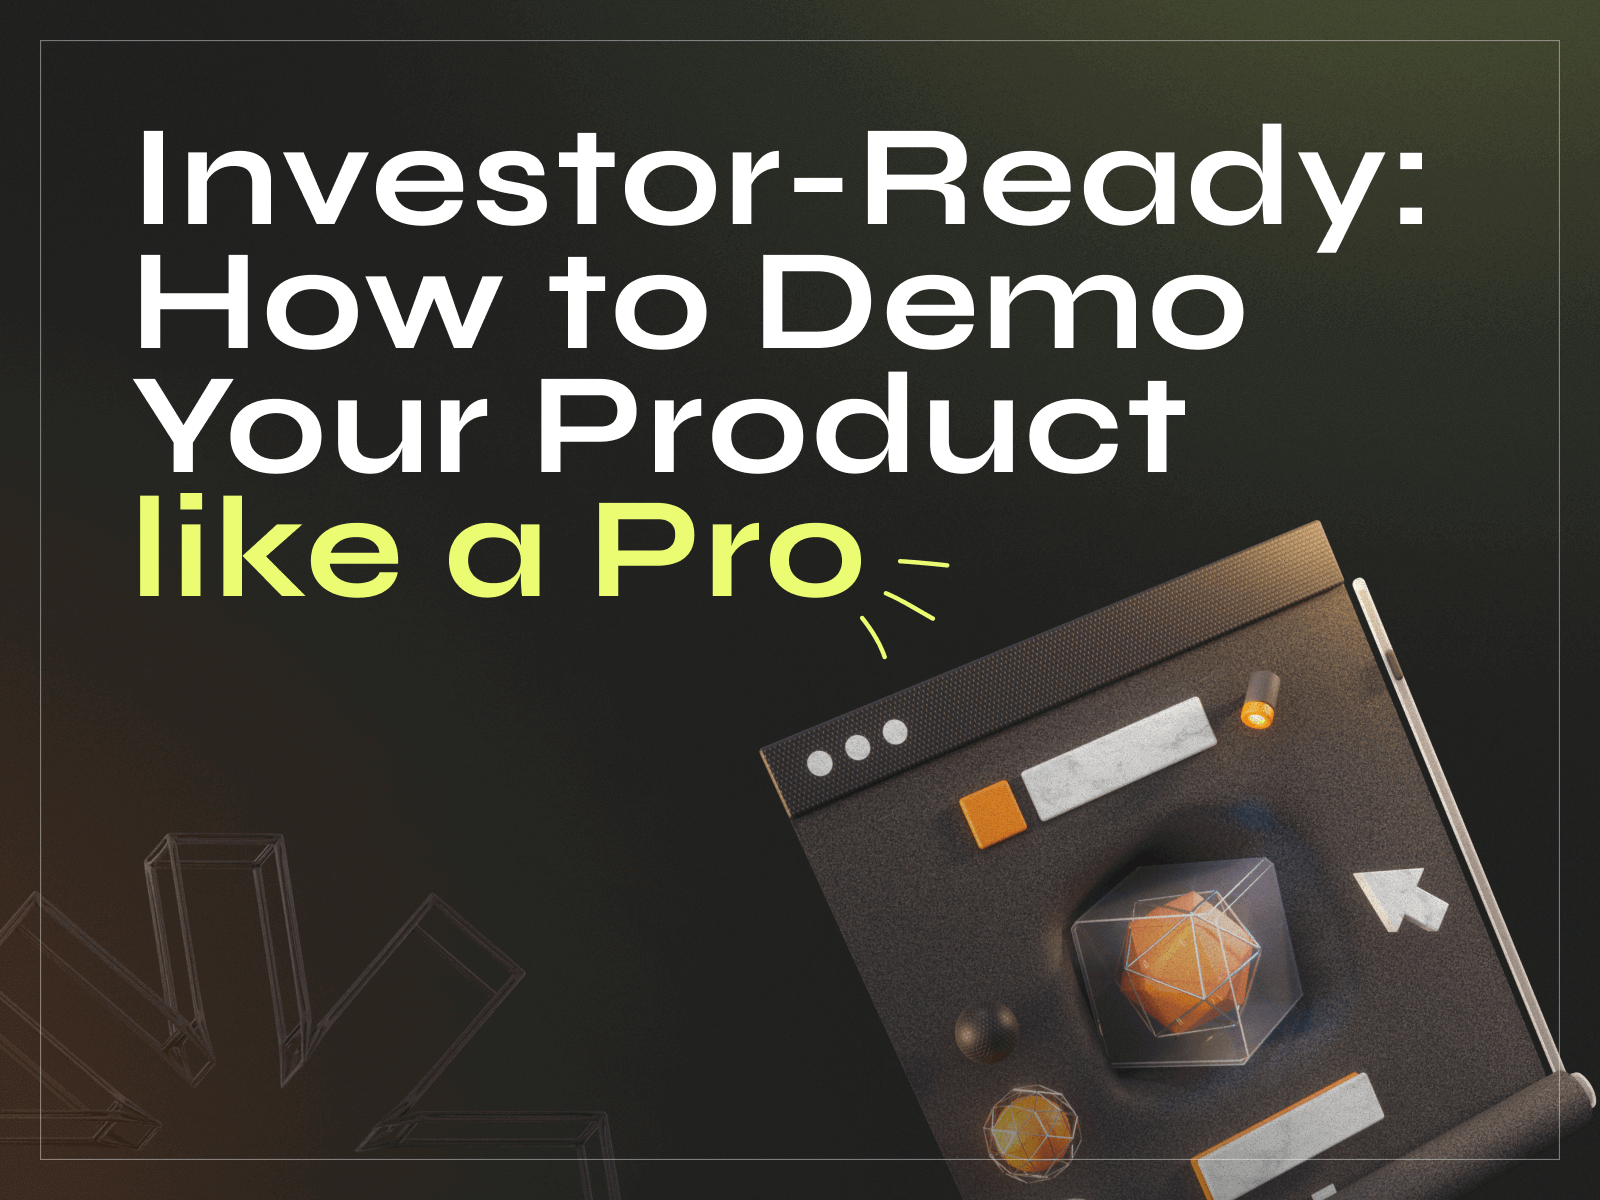 Investor-Ready: How to Demo Your Product Like a Pro - Photo 